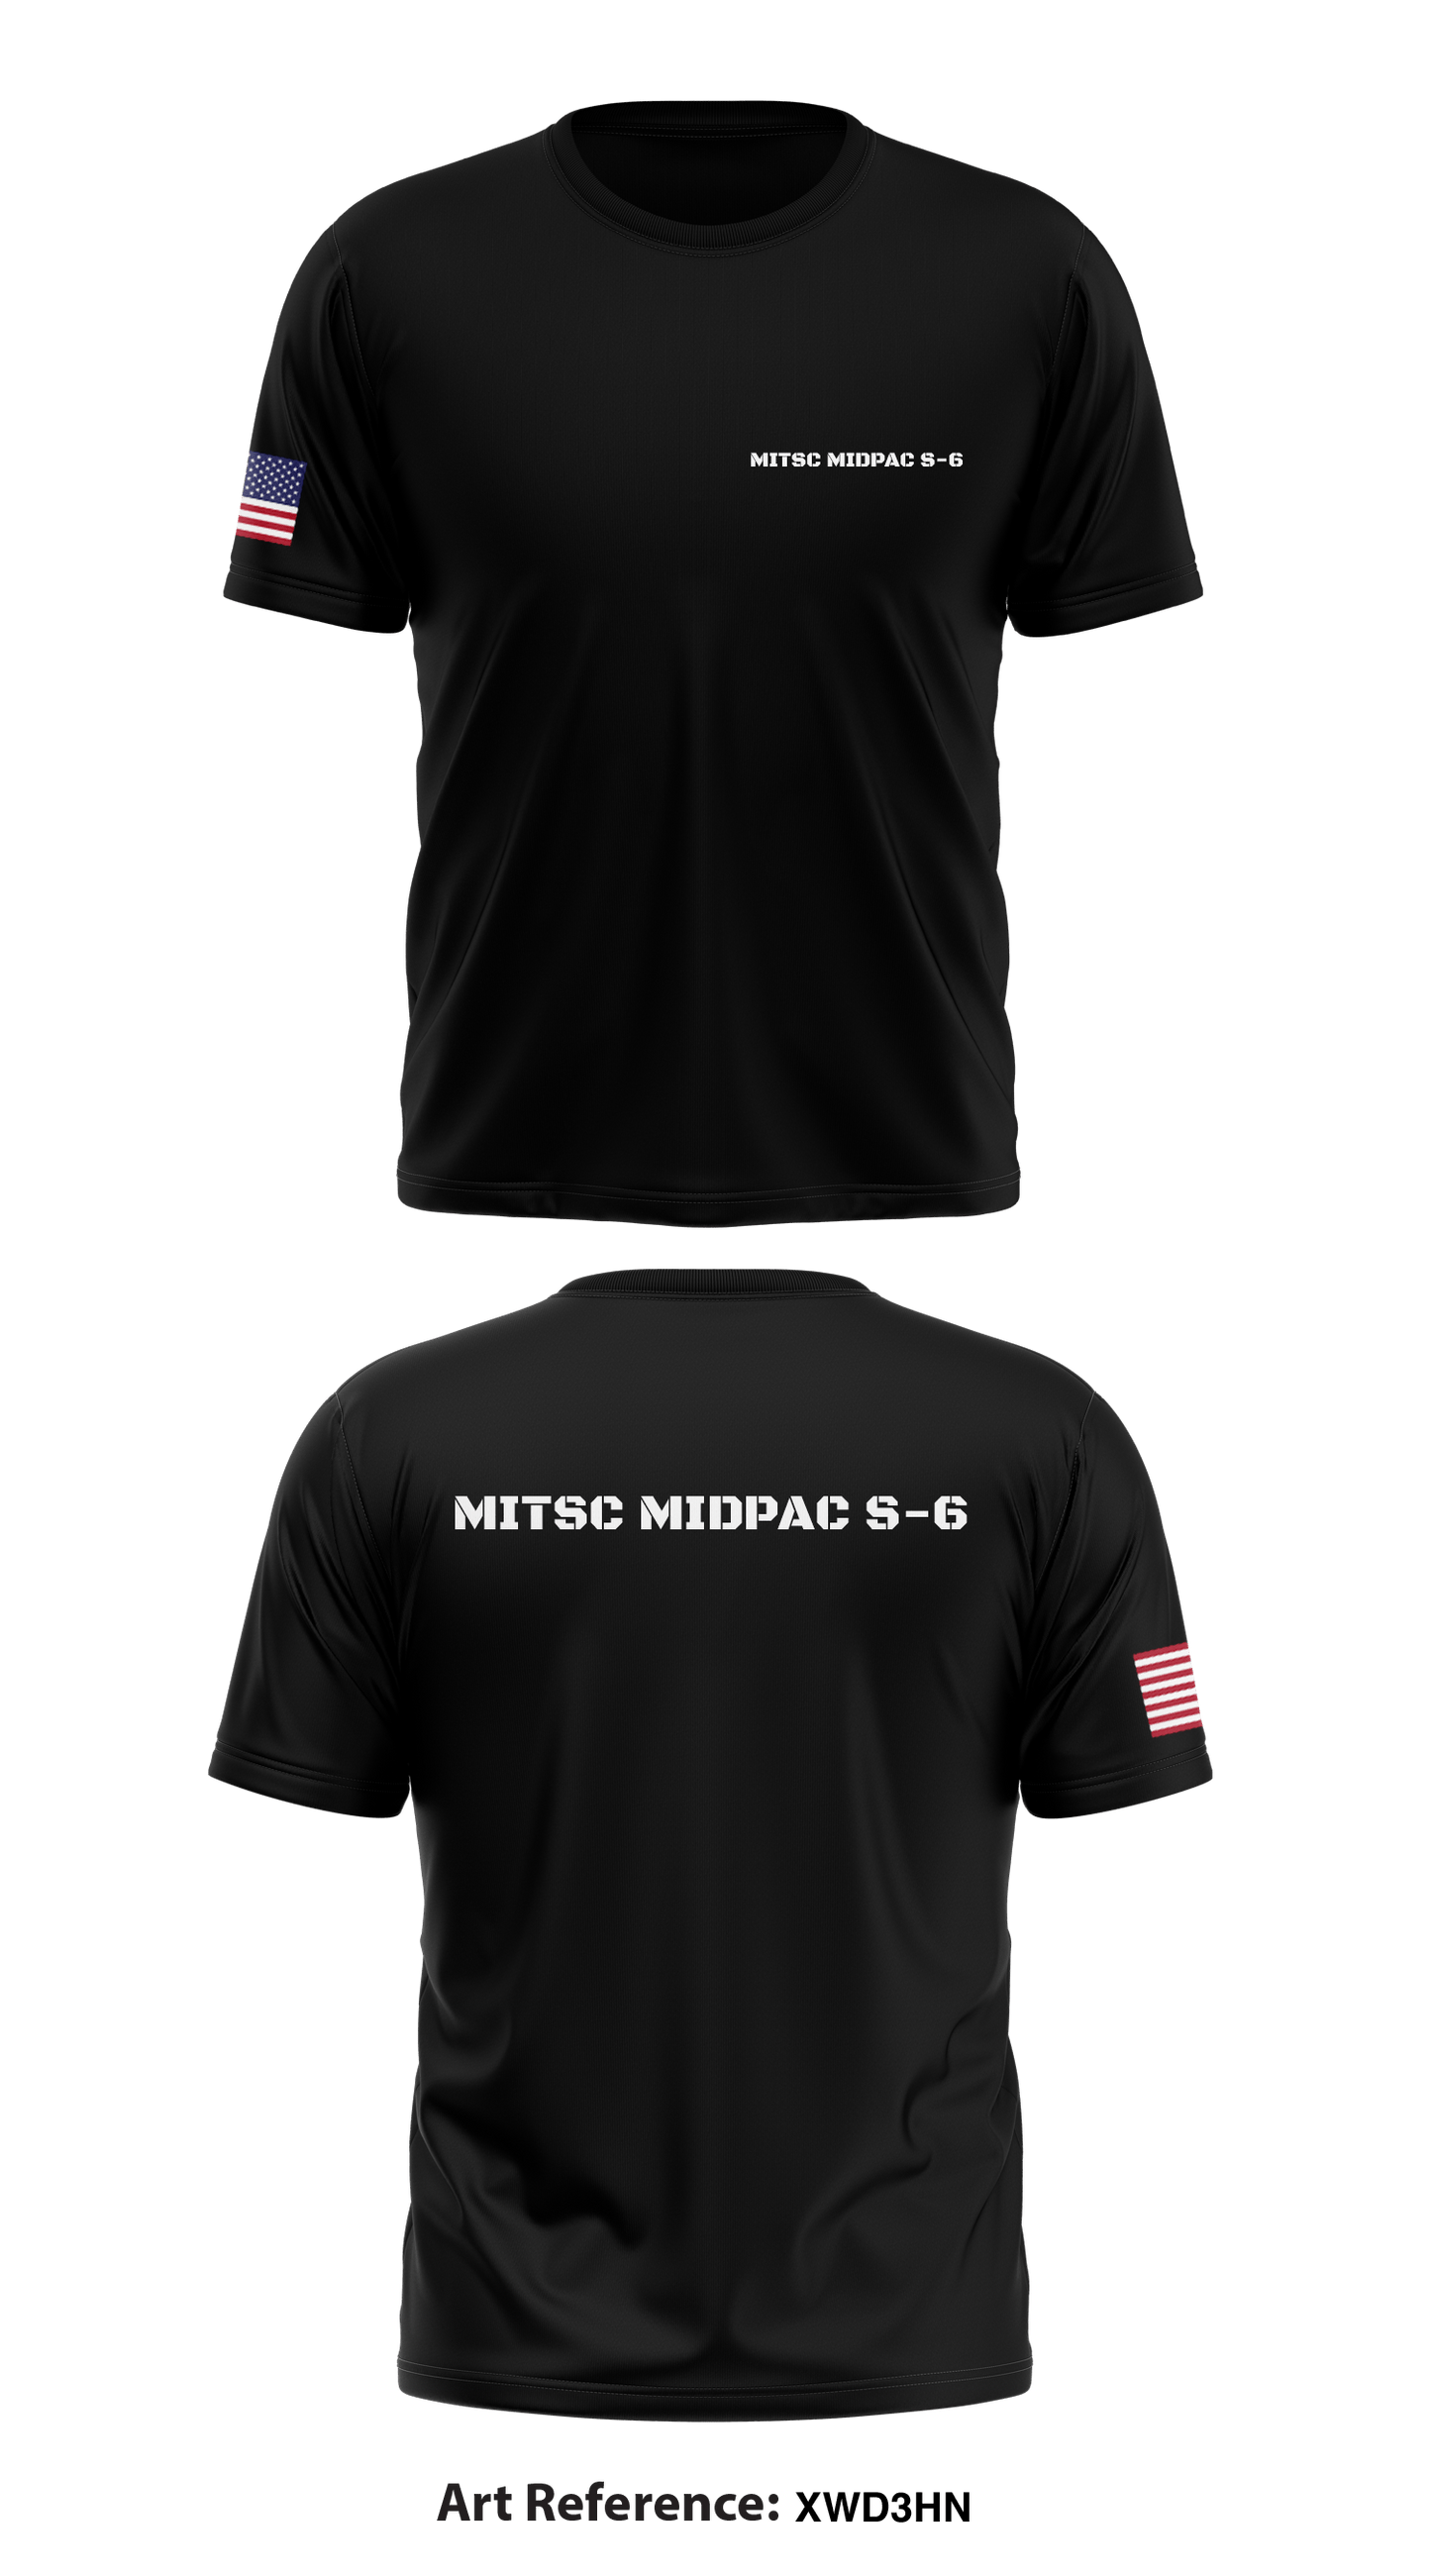 MITSC MIDPAC  S-6 Store 1 Core Men's SS Performance Tee - XwD3Hn